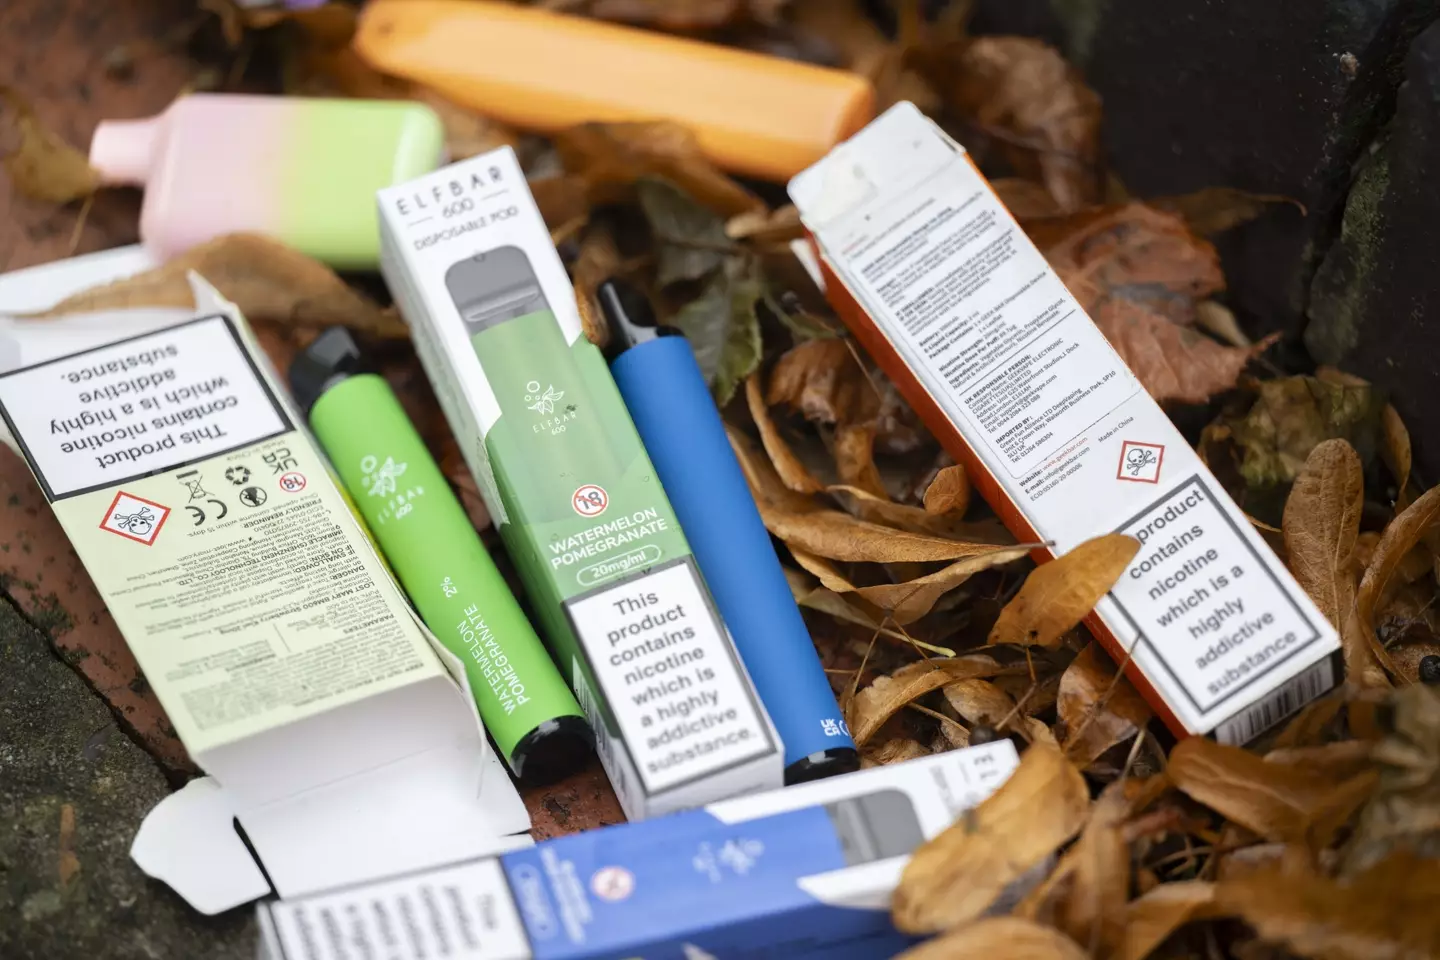 Packaging vapes come in could become far plainer.